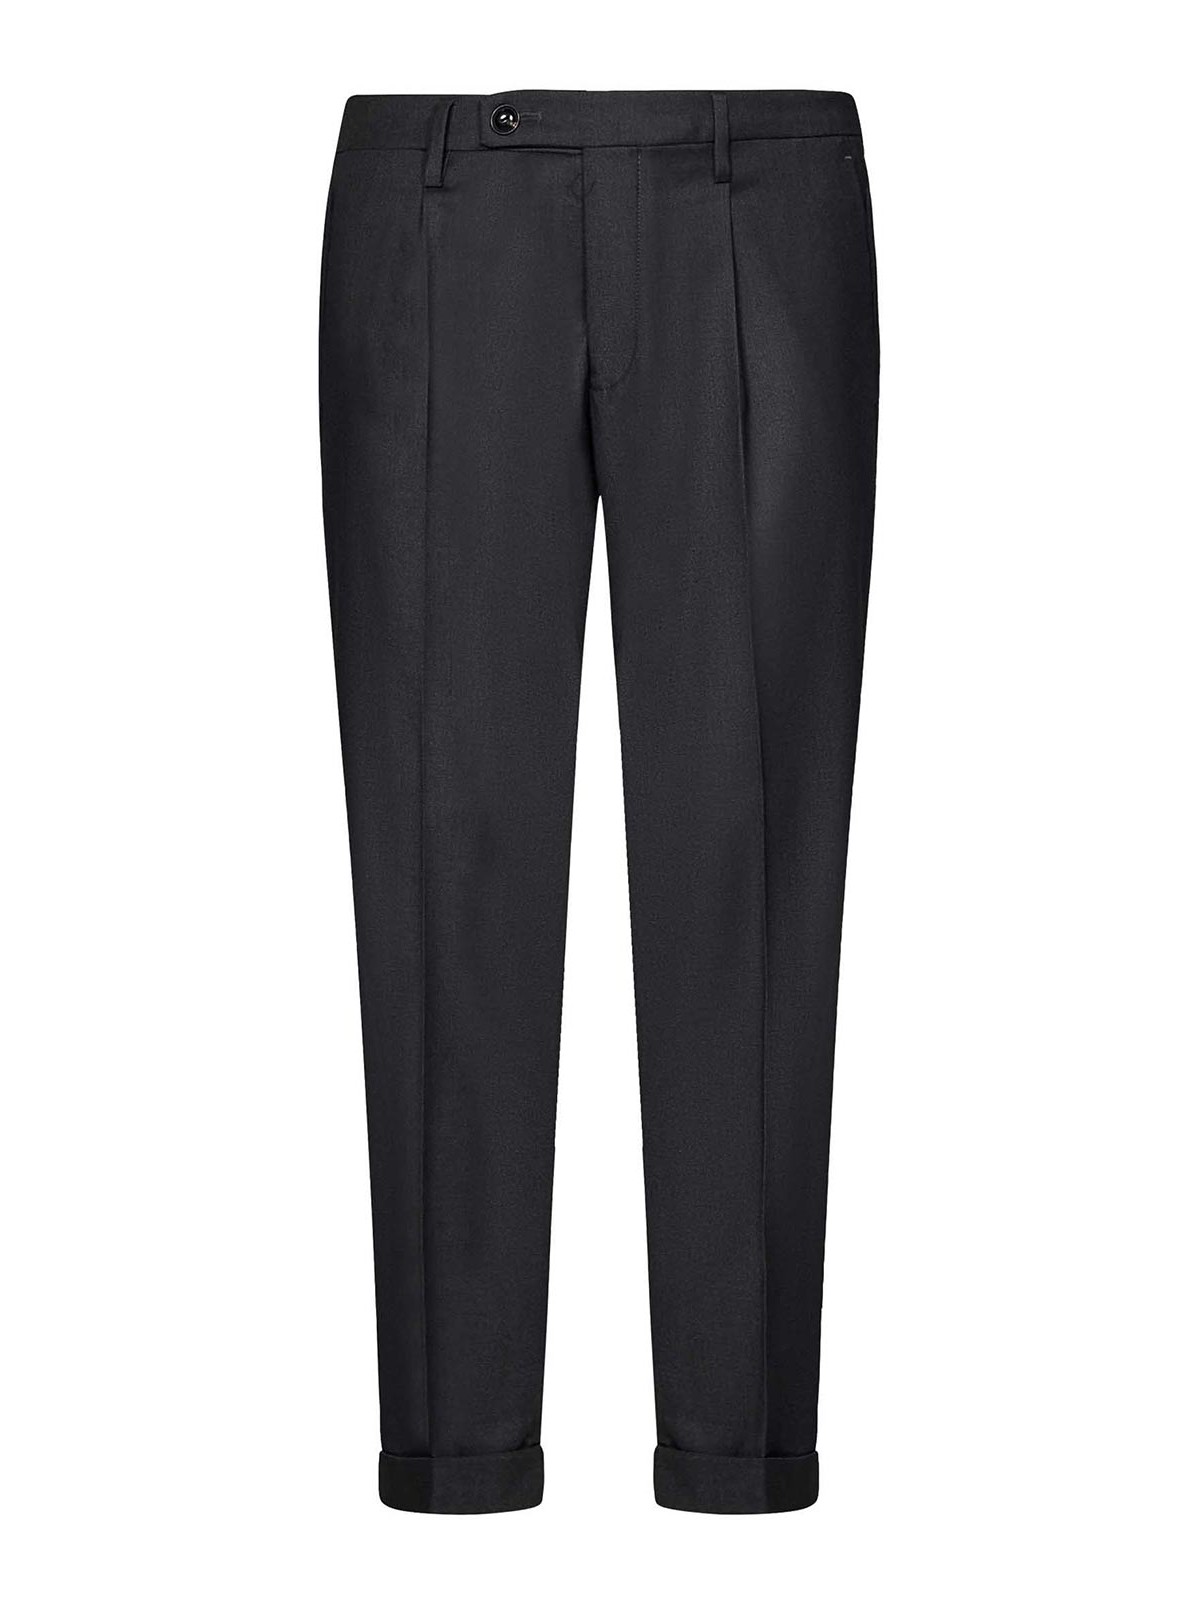 Grey Roan single-pleat wool trousers | The Row | MATCHES UK